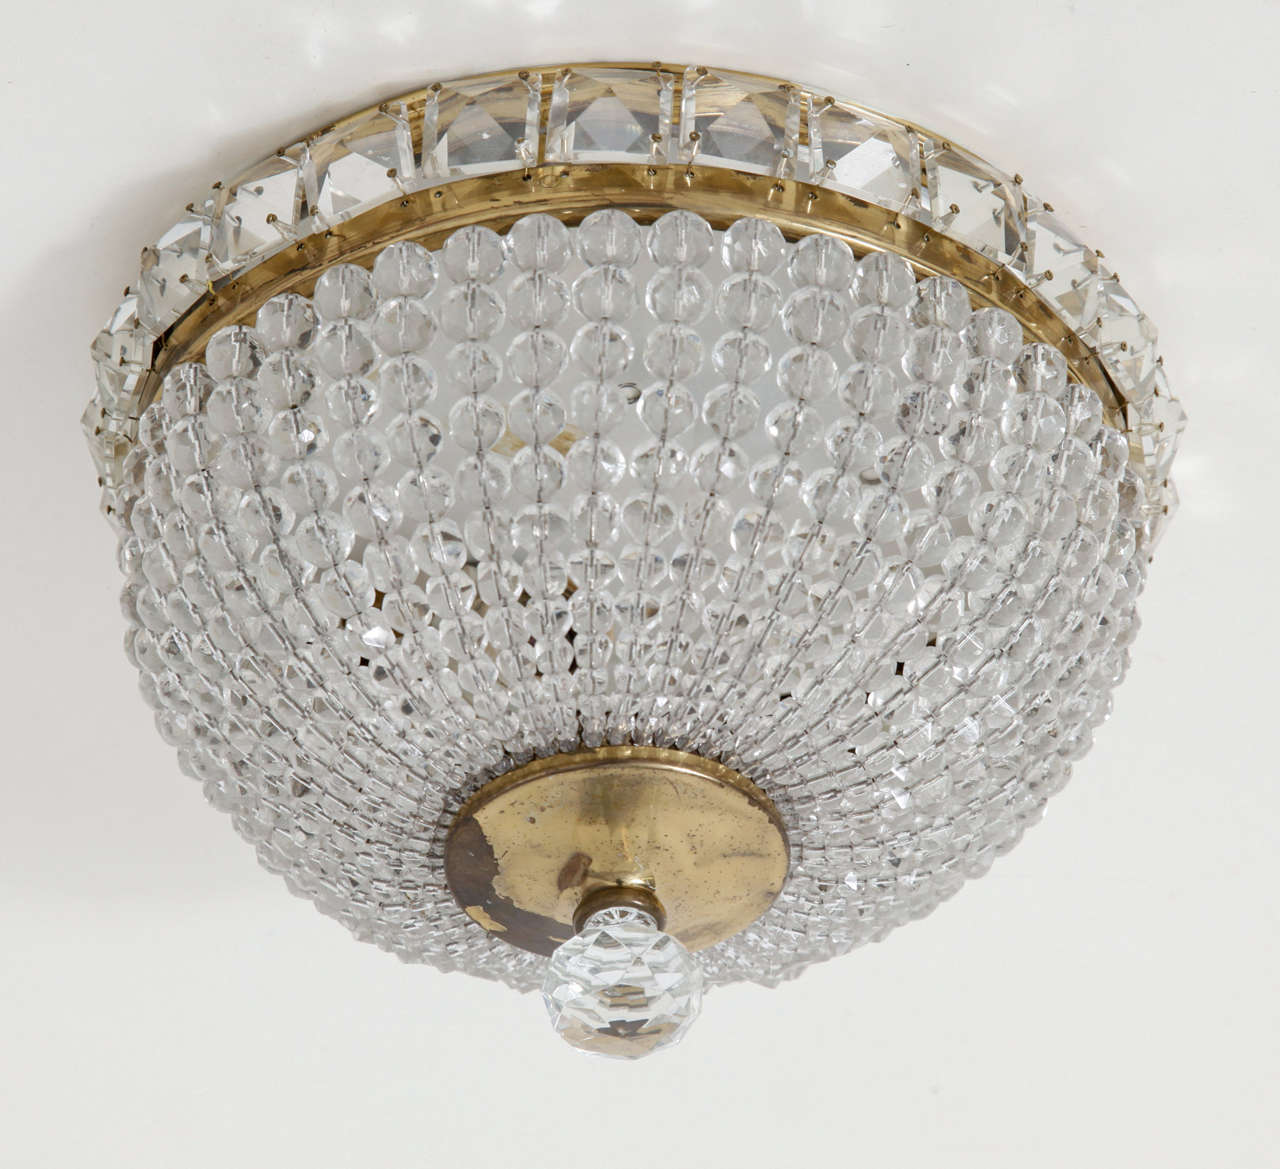 Sac a Perles or Basket Crystal and Brass Ceilinglight. Crystals hanging from a brass frame.